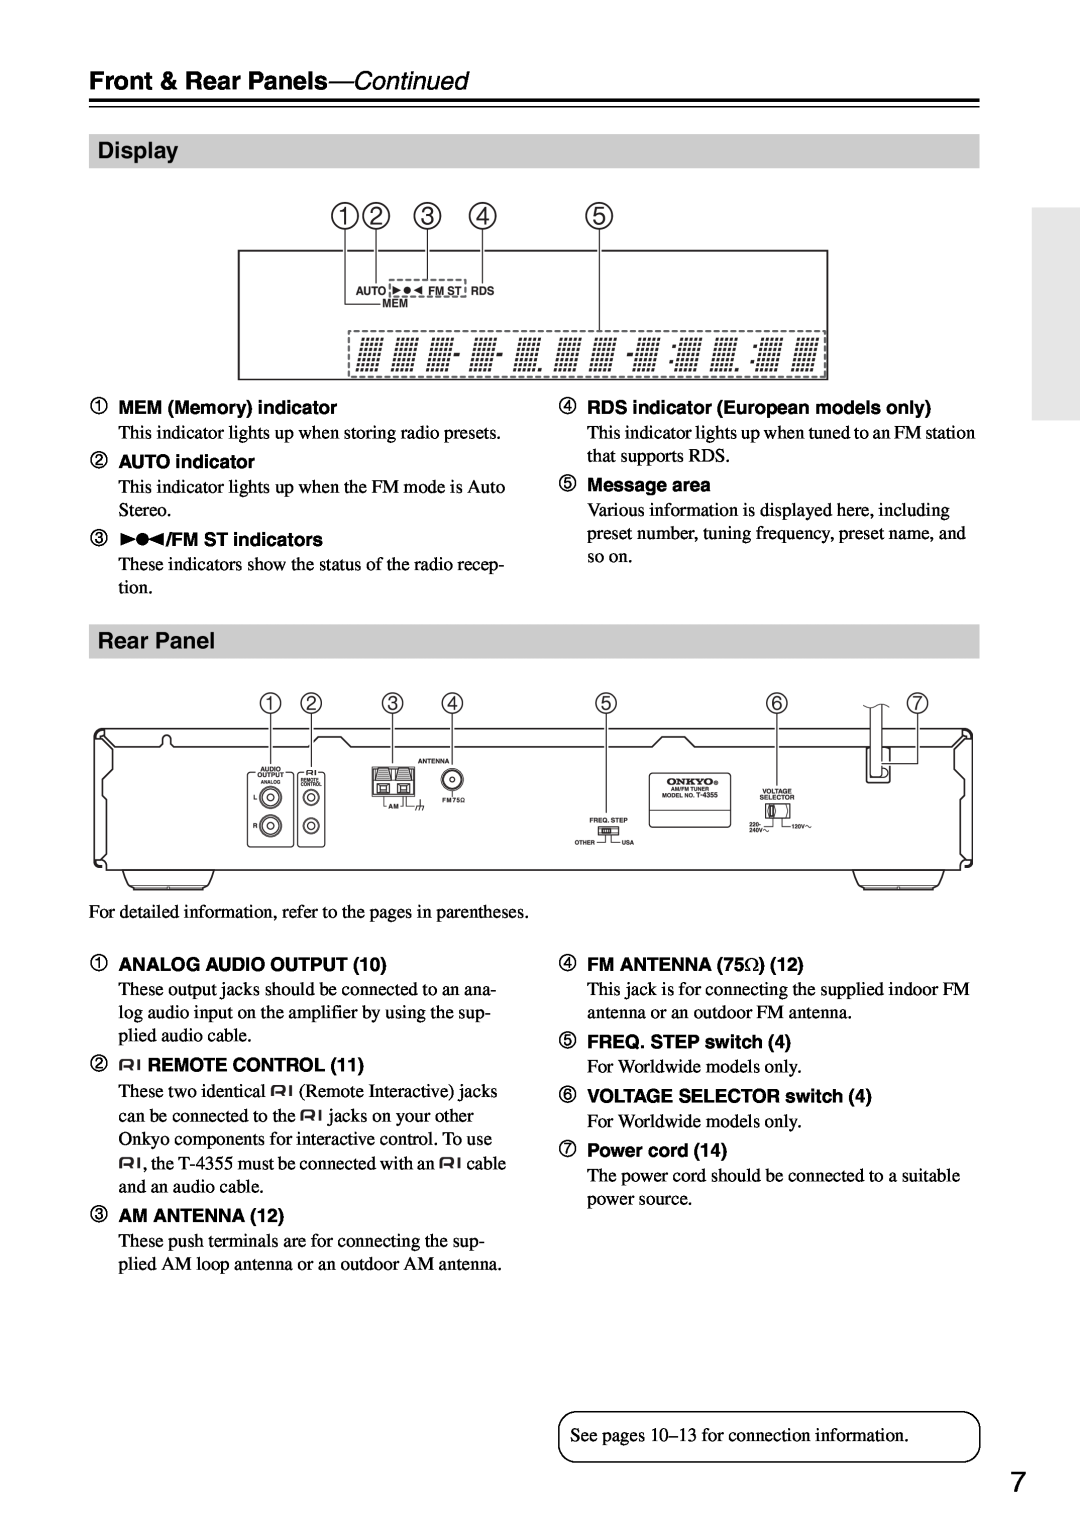 Onkyo T-4355 instruction manual    , Front & Rear Panels-Continued,     